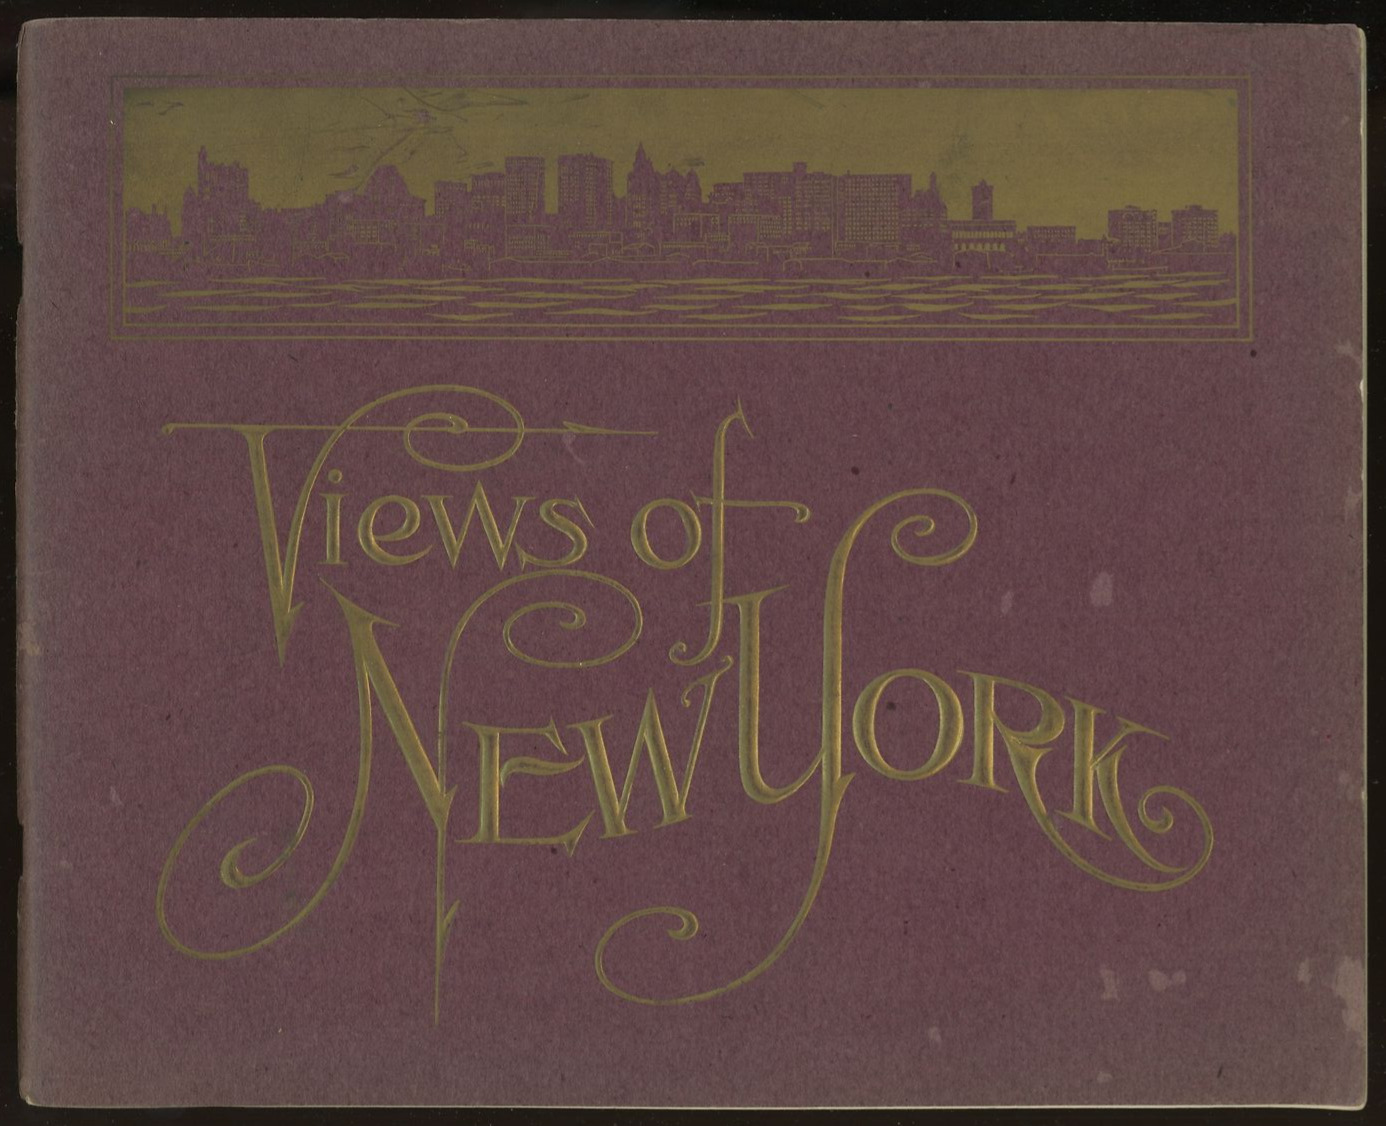 c1900 VIEWS OF NEW YORK CITY L.H. NELSON COMPANY MULTIPLE PHOTOS 48 PAGES 18-15